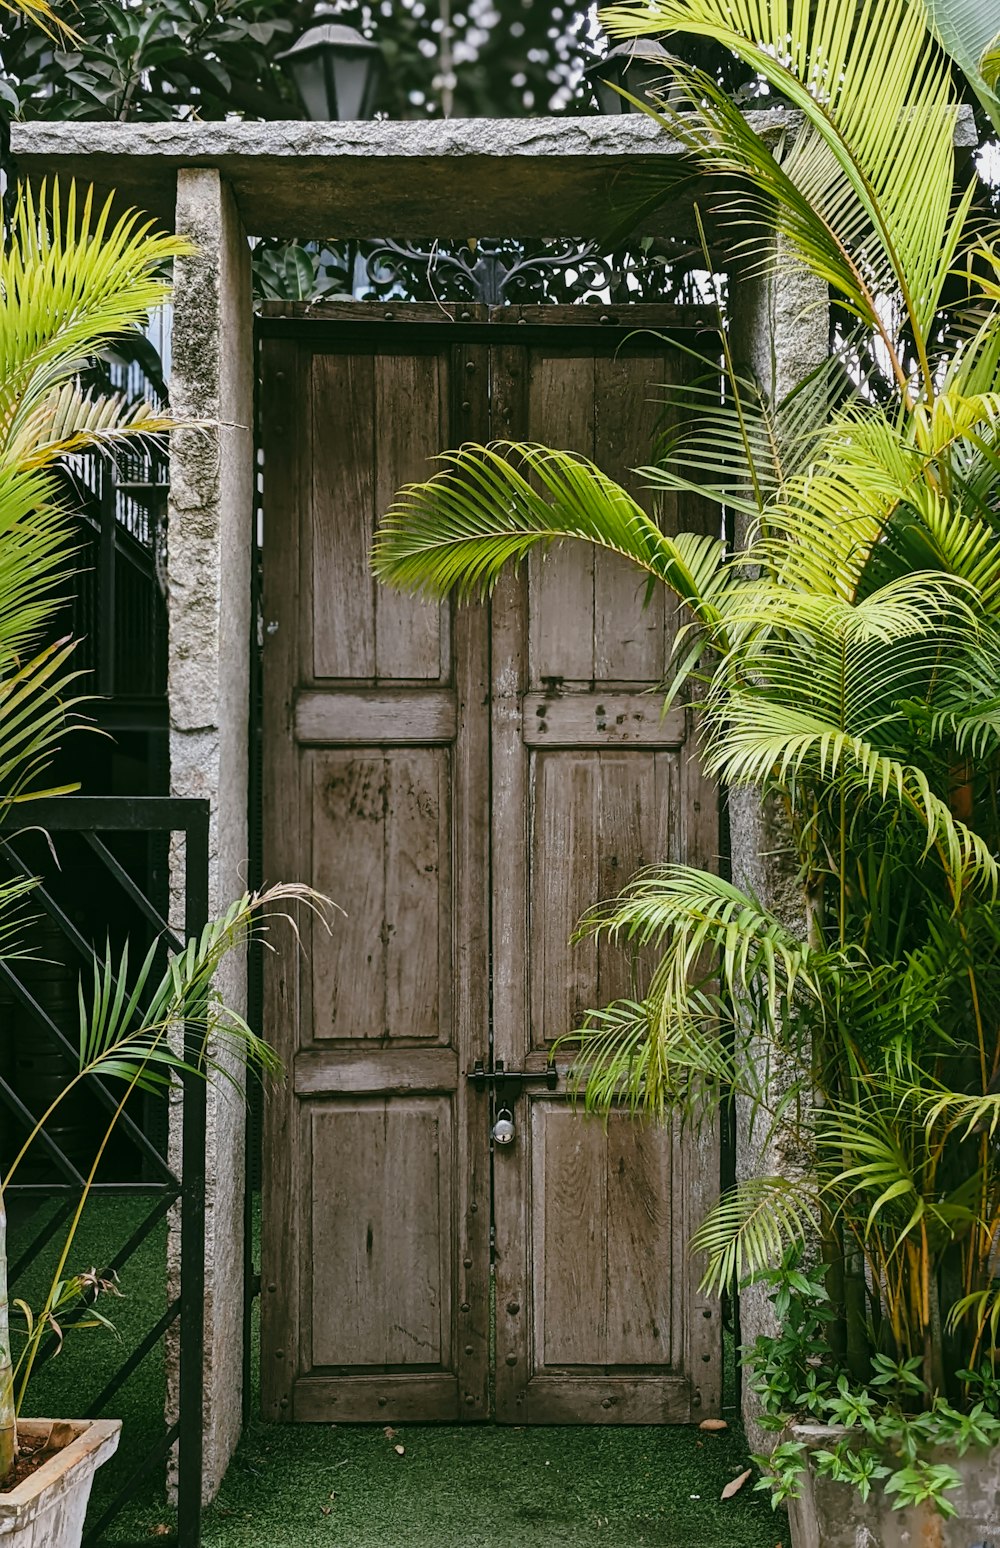 a wooden door surrounded by palm trees and potted plants